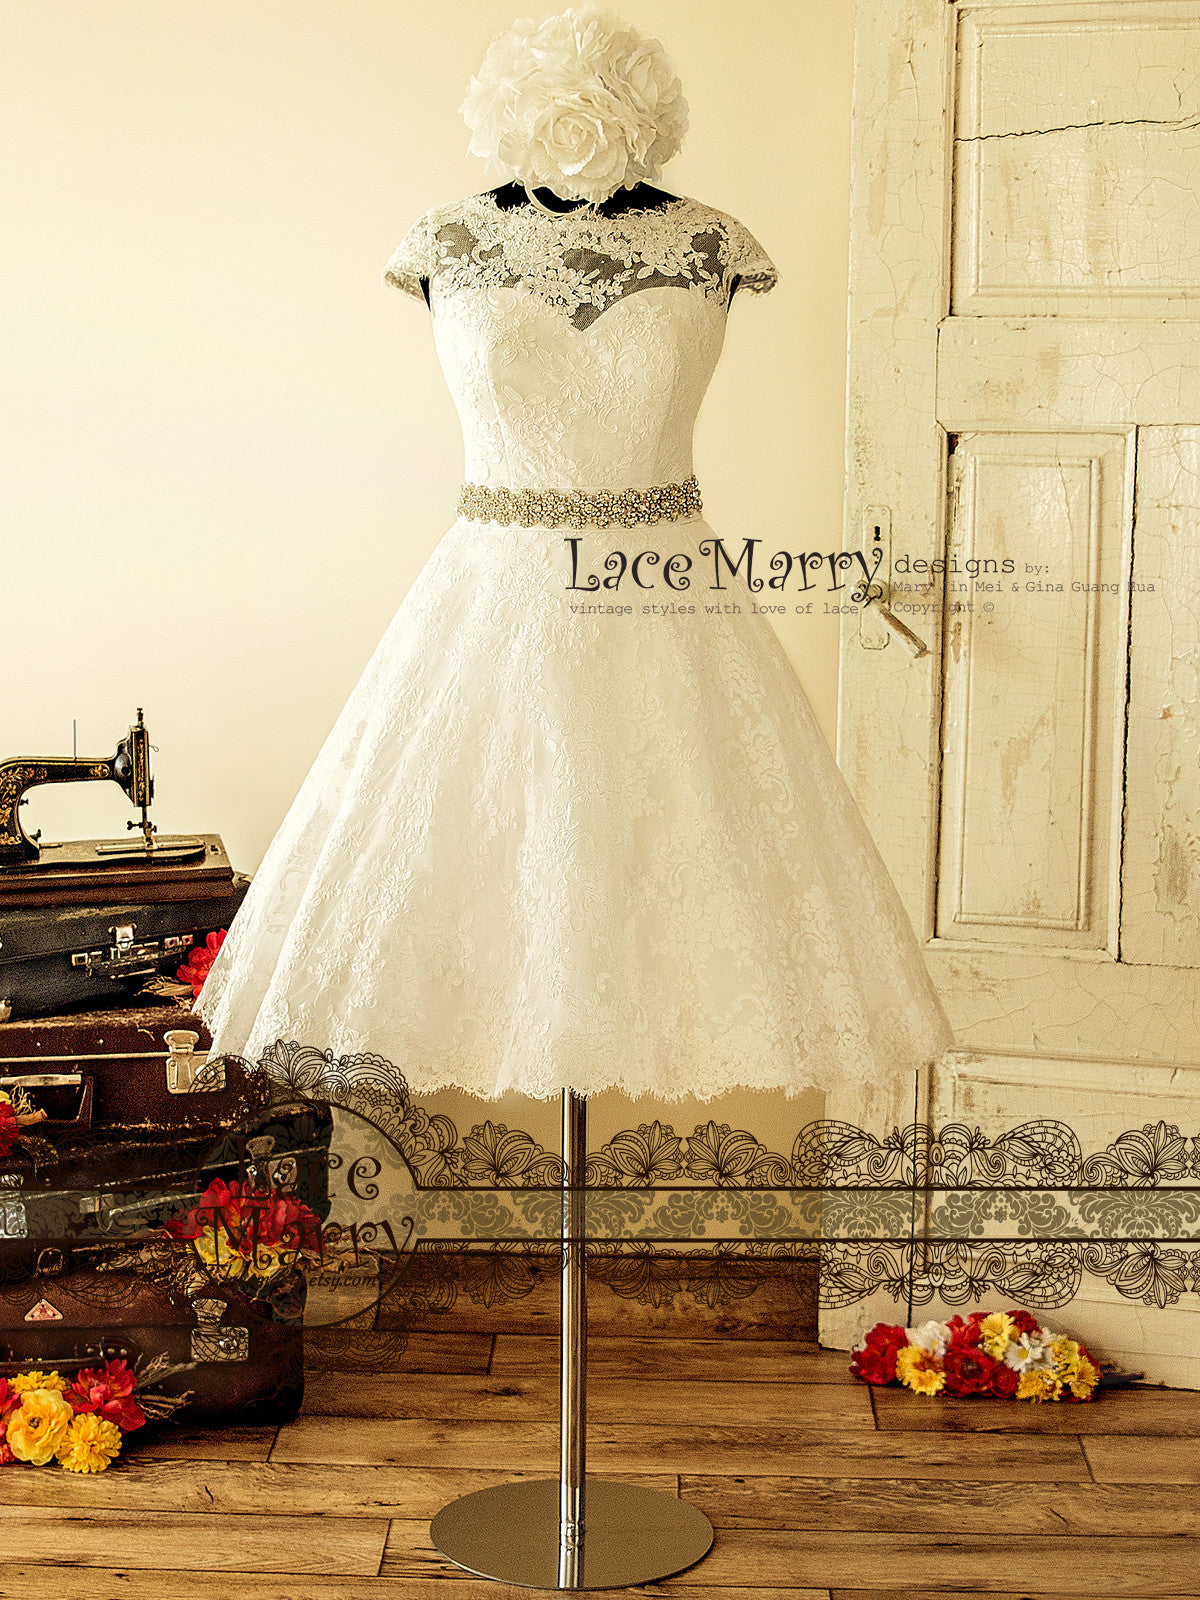 1950's Style Tea Length Wedding Dress from Alencon Lace - LaceMarry